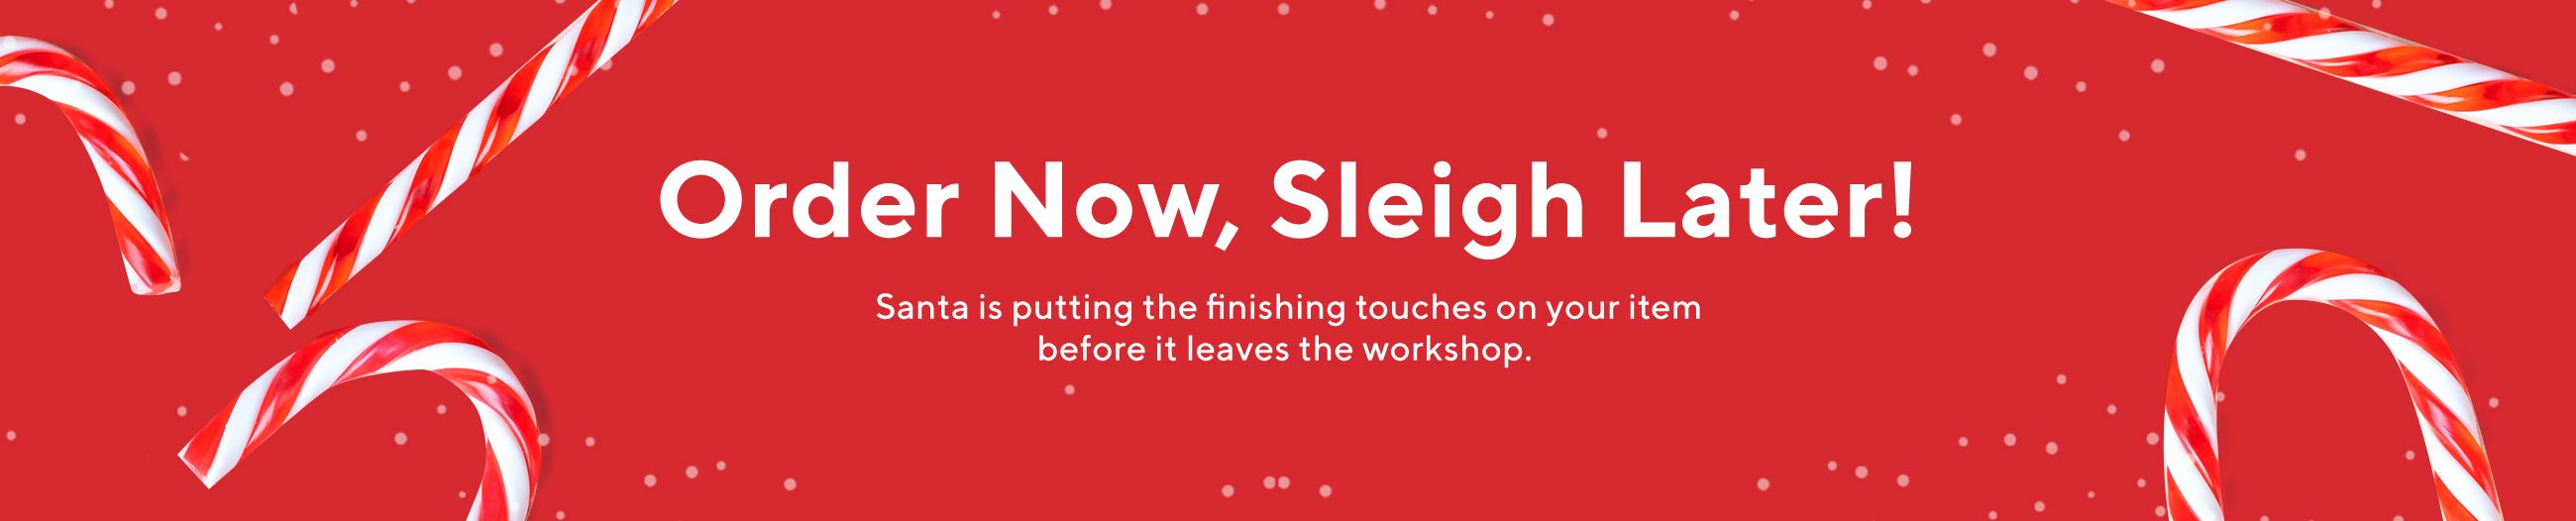 Order Now, Sleigh Later! Santa is putting the finishing touches on your item before it leaves the workshop. 